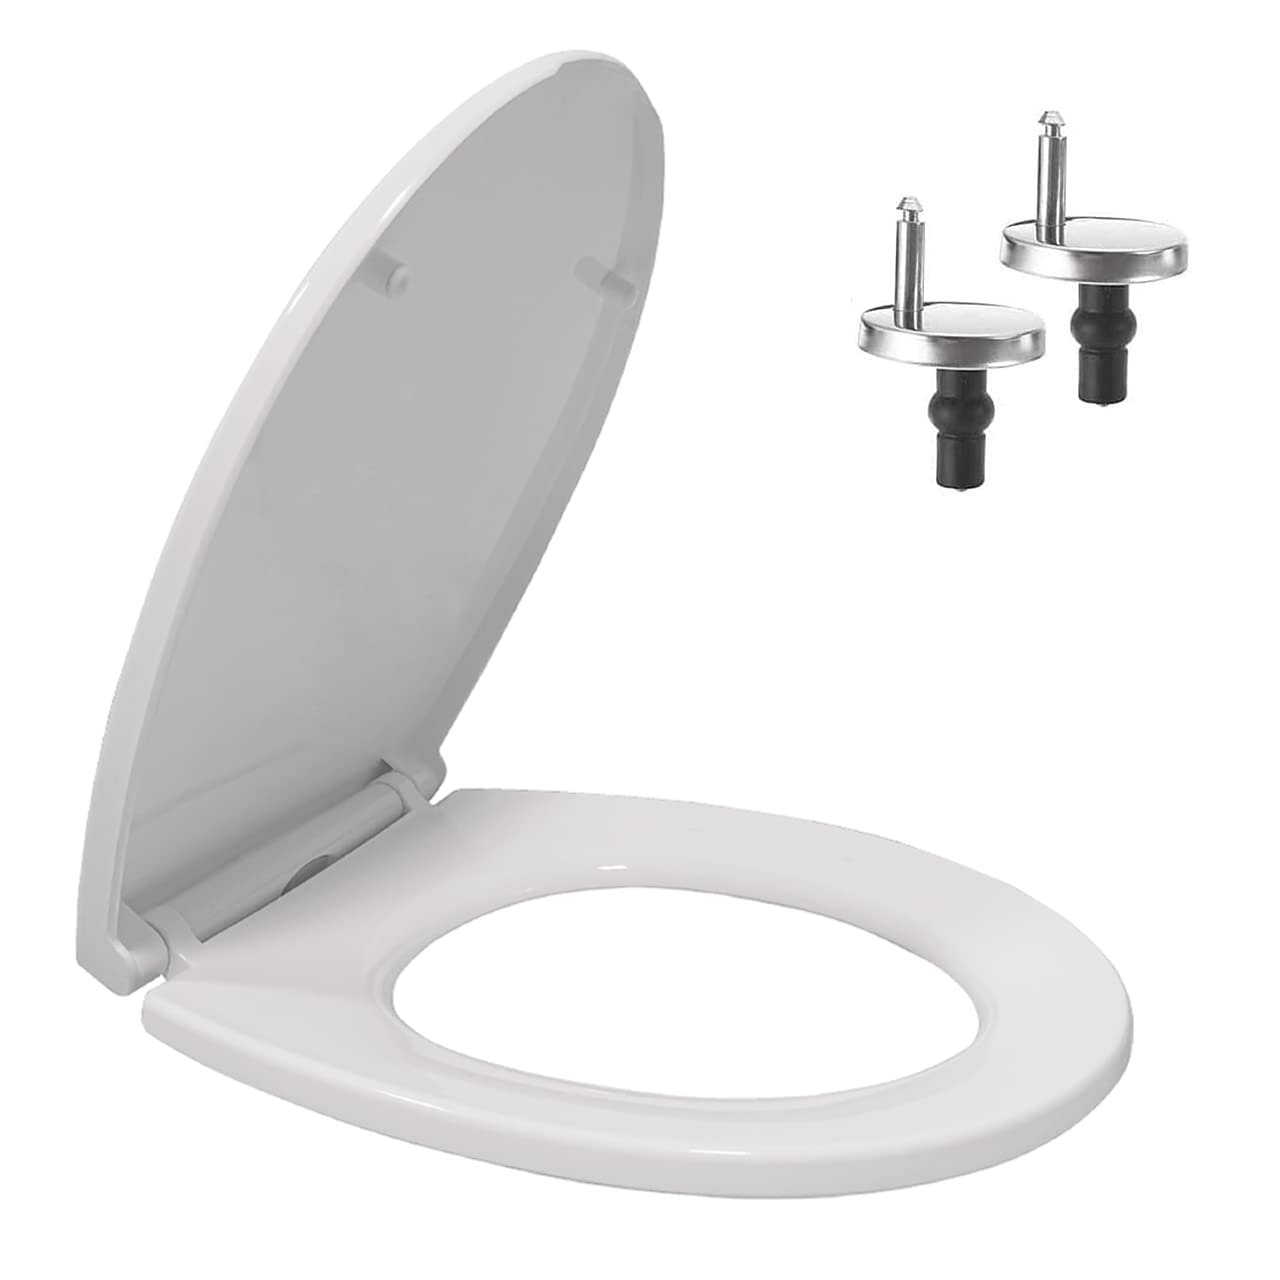 Oval Shape Toilet Seat Soft Close Top Fixing with Adjustable Hinges